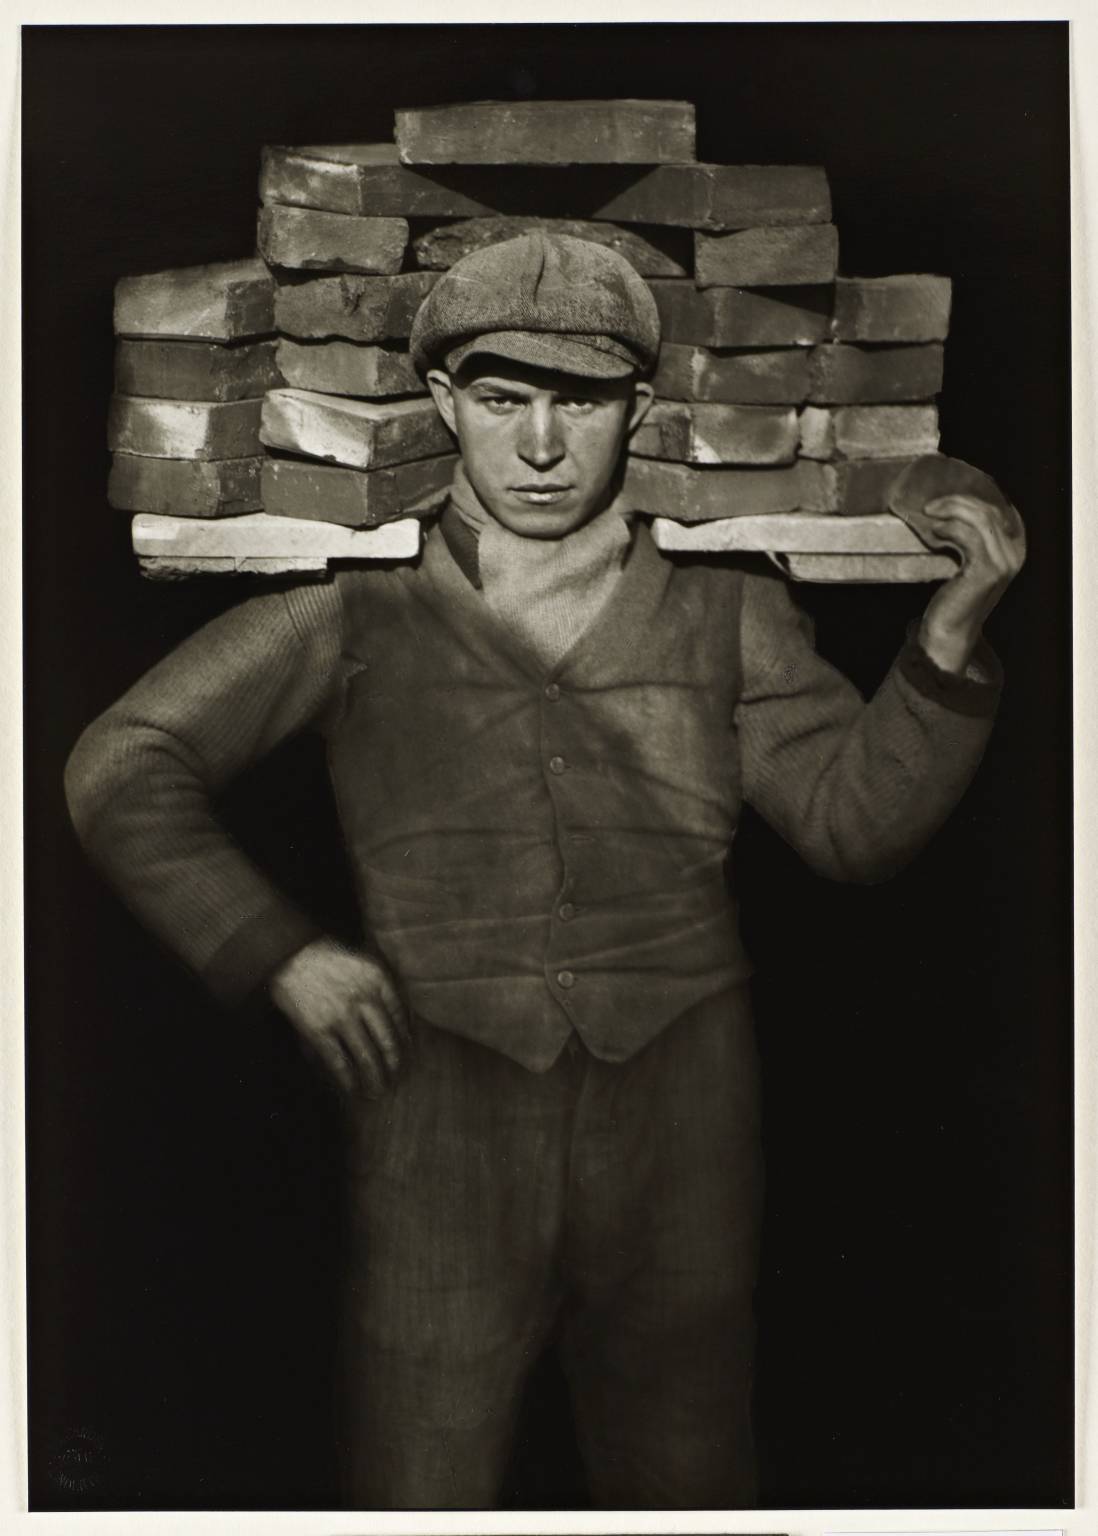 Bricklayer in 1928.